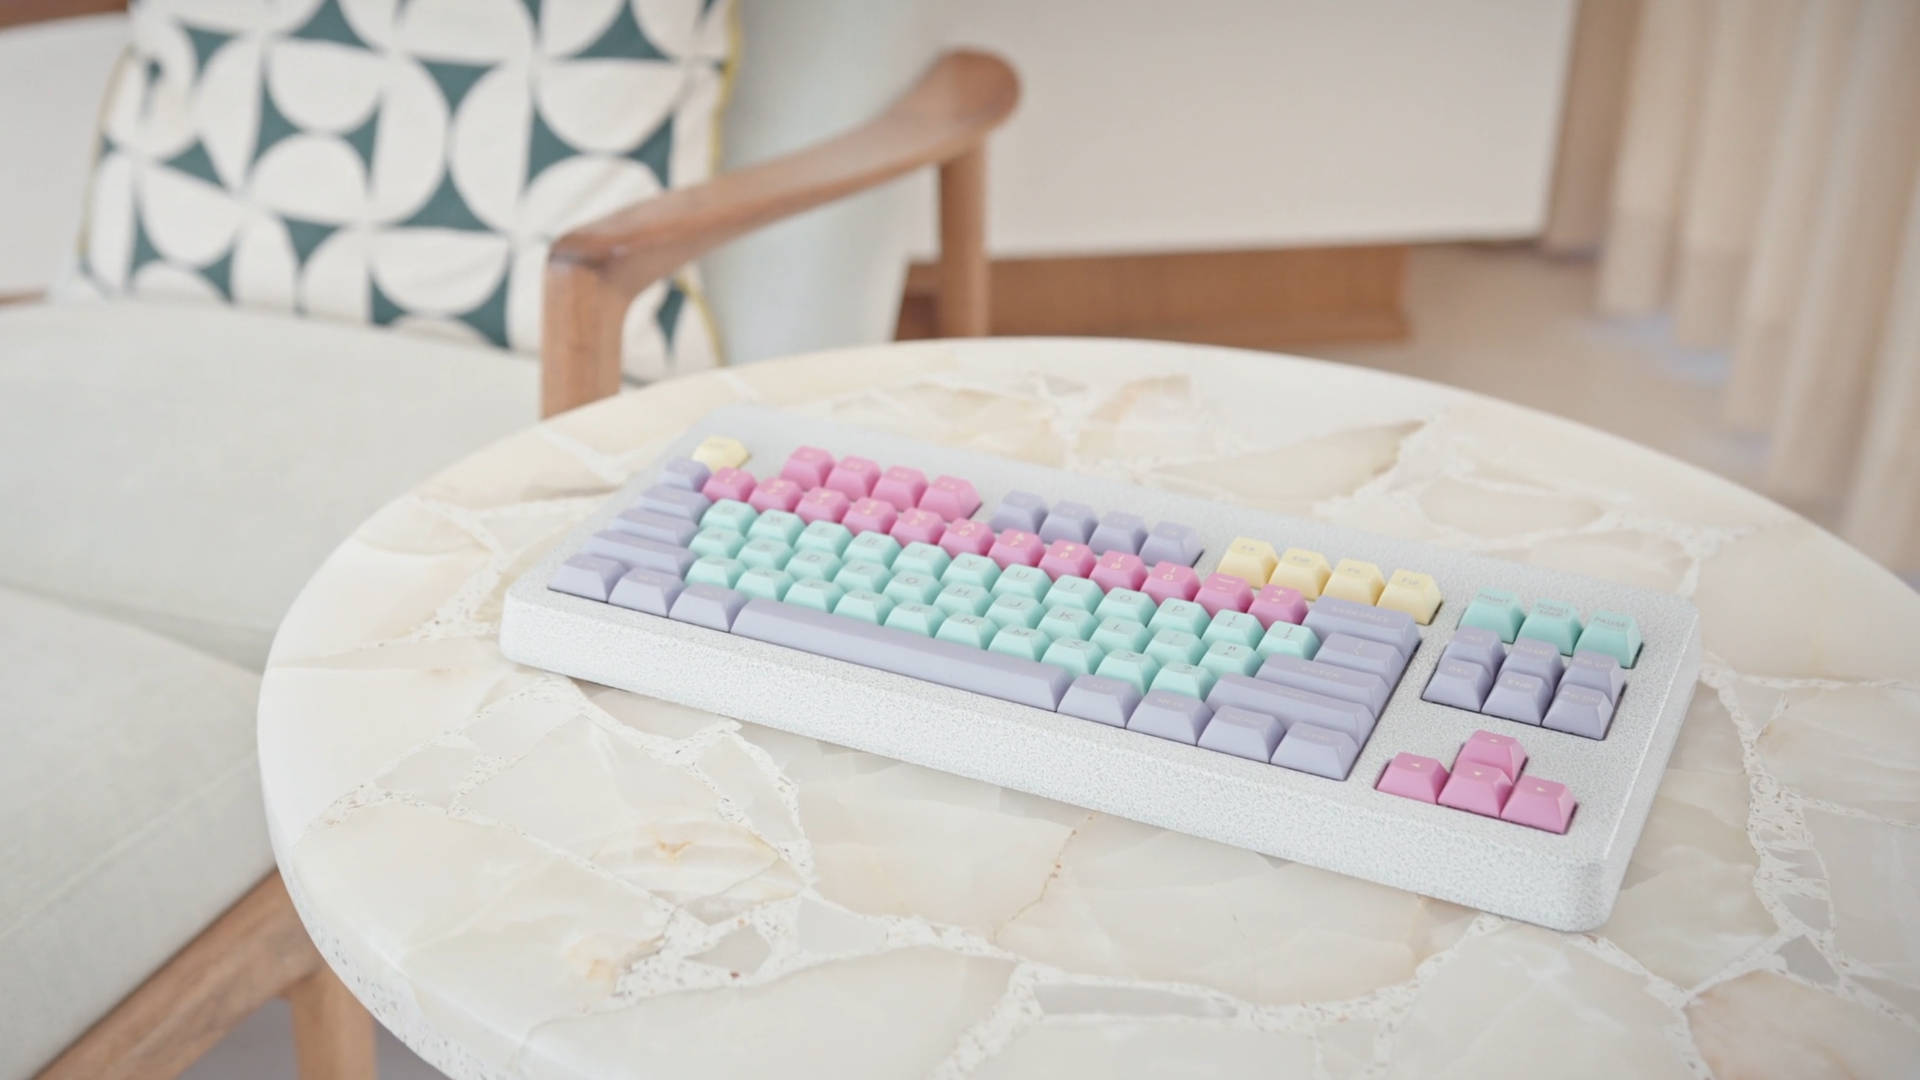  One boutique keyboard maker spent years engineering the ultimate stabilizer by 